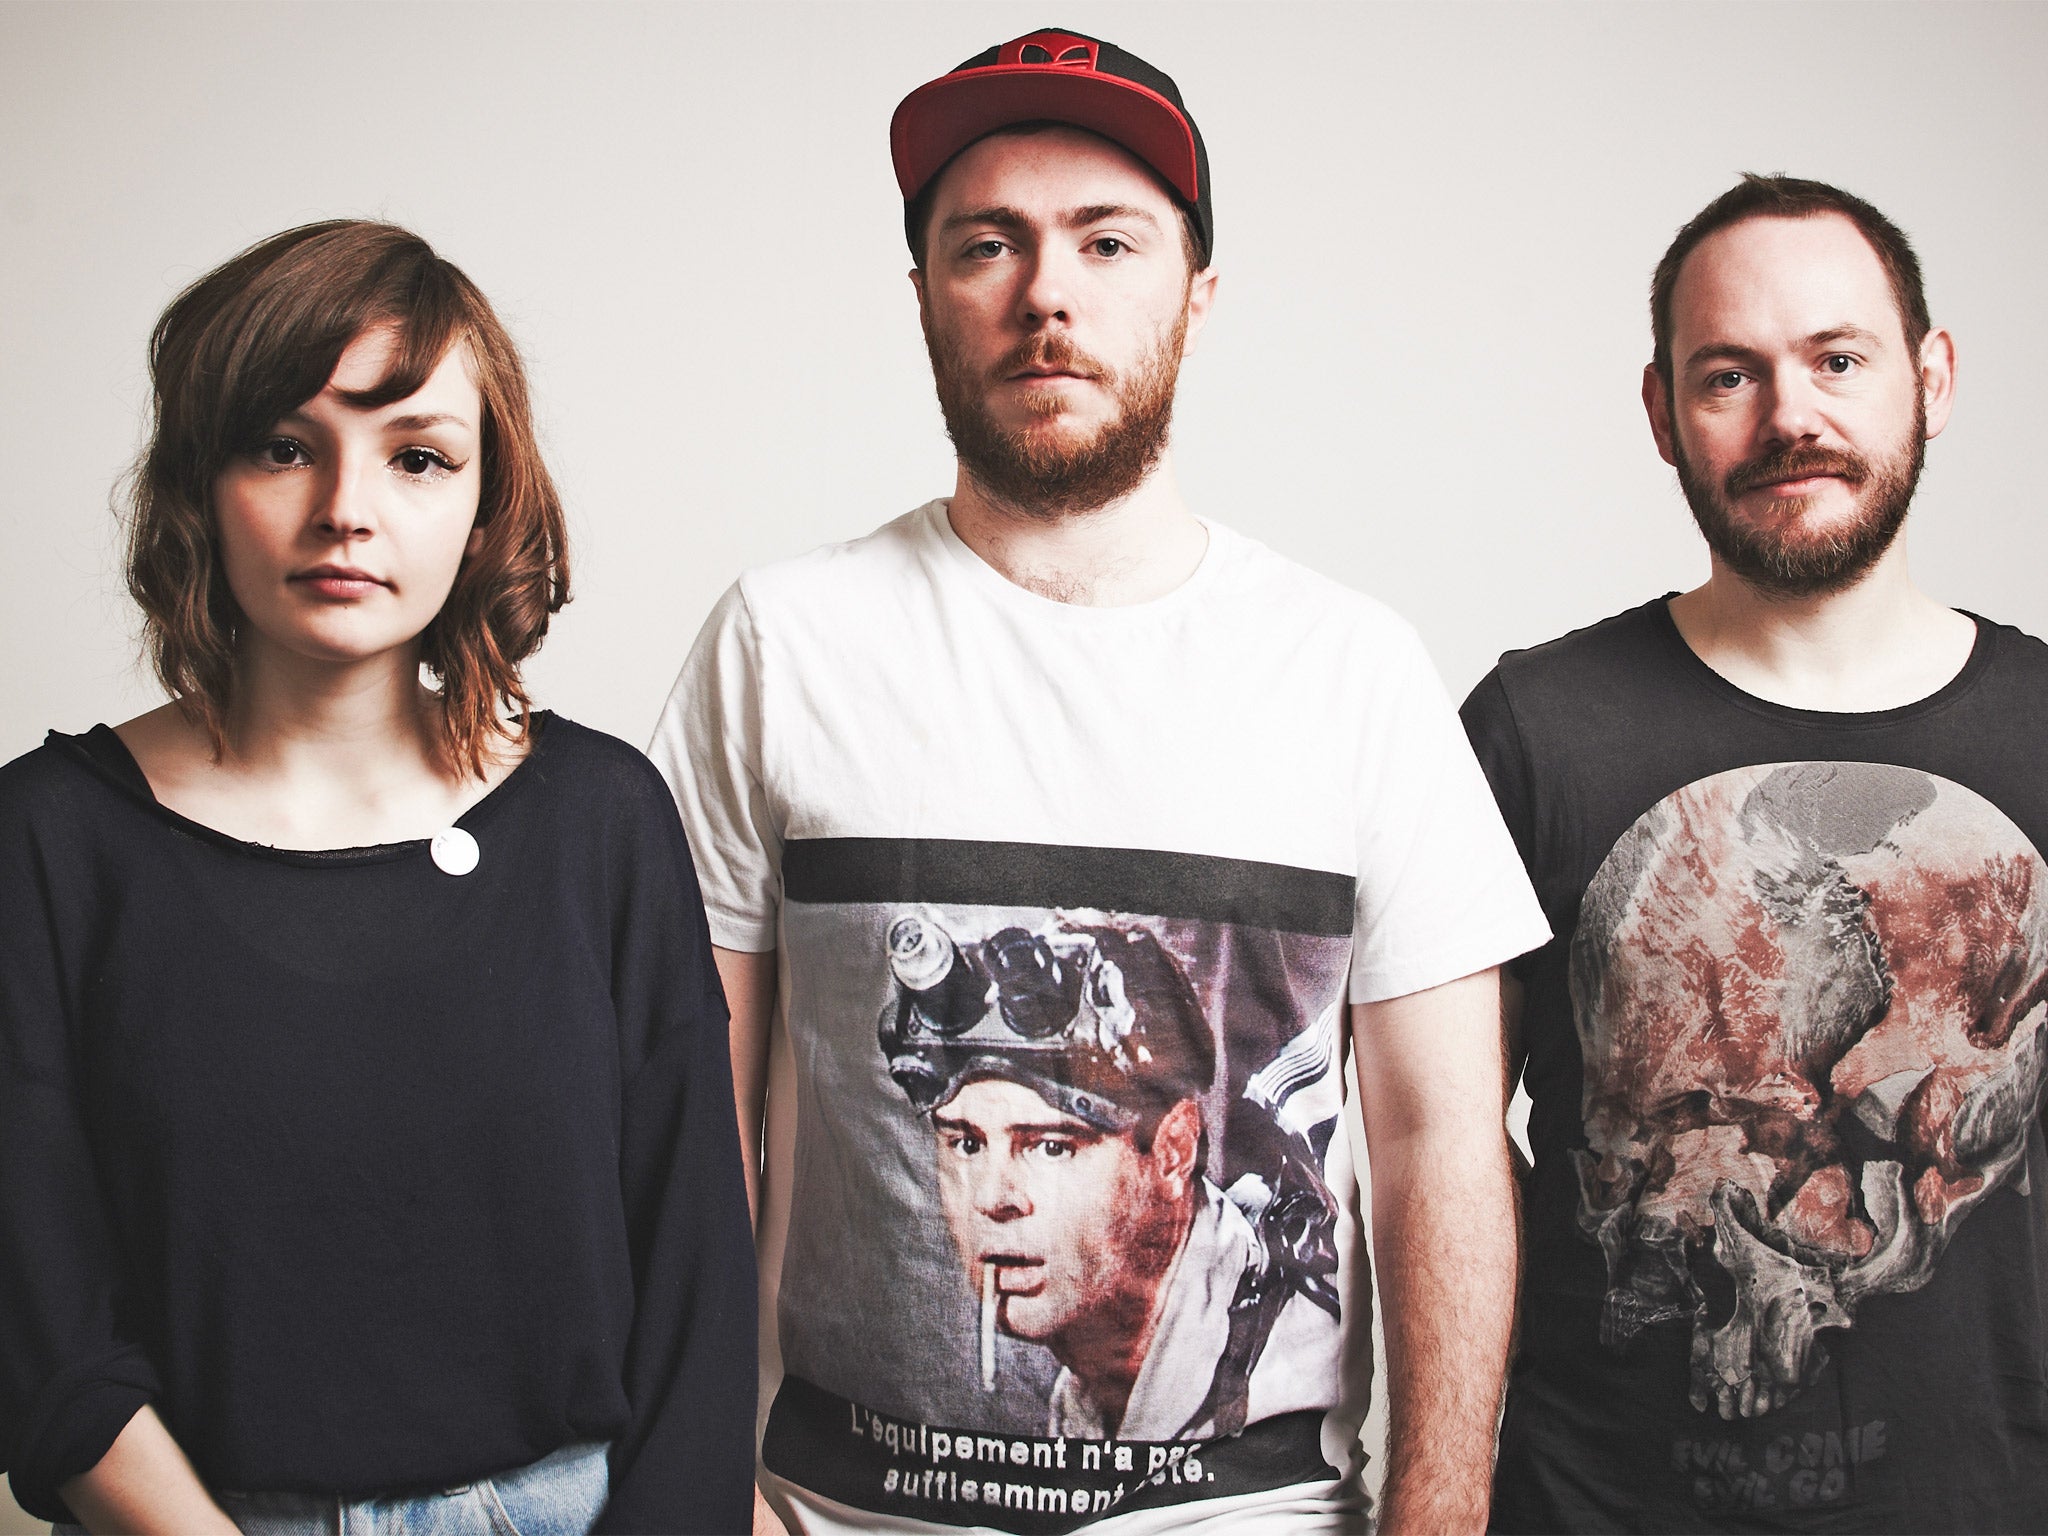 Sacred music: Lauren Mayberry, Martin Doherty and Iain Cook of
the widely lauded Glasgow band Chvrches